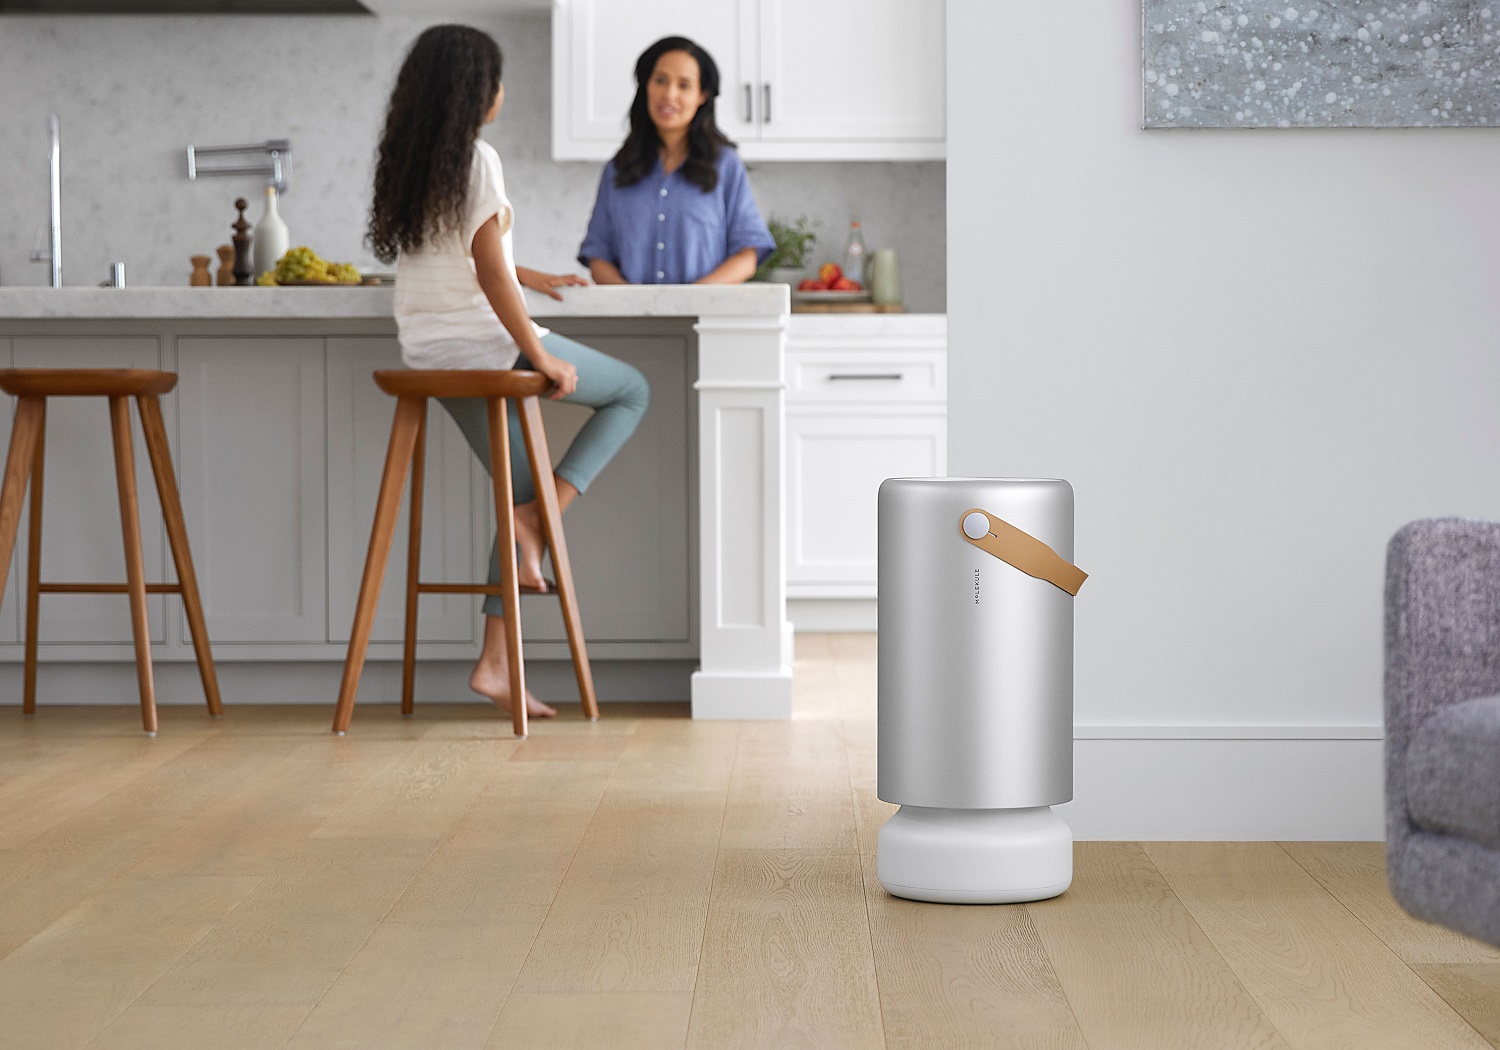 Molekule's PECO Air Purifier Kills COVID-19 and Other Airborn Germs Now Available in EU and UK